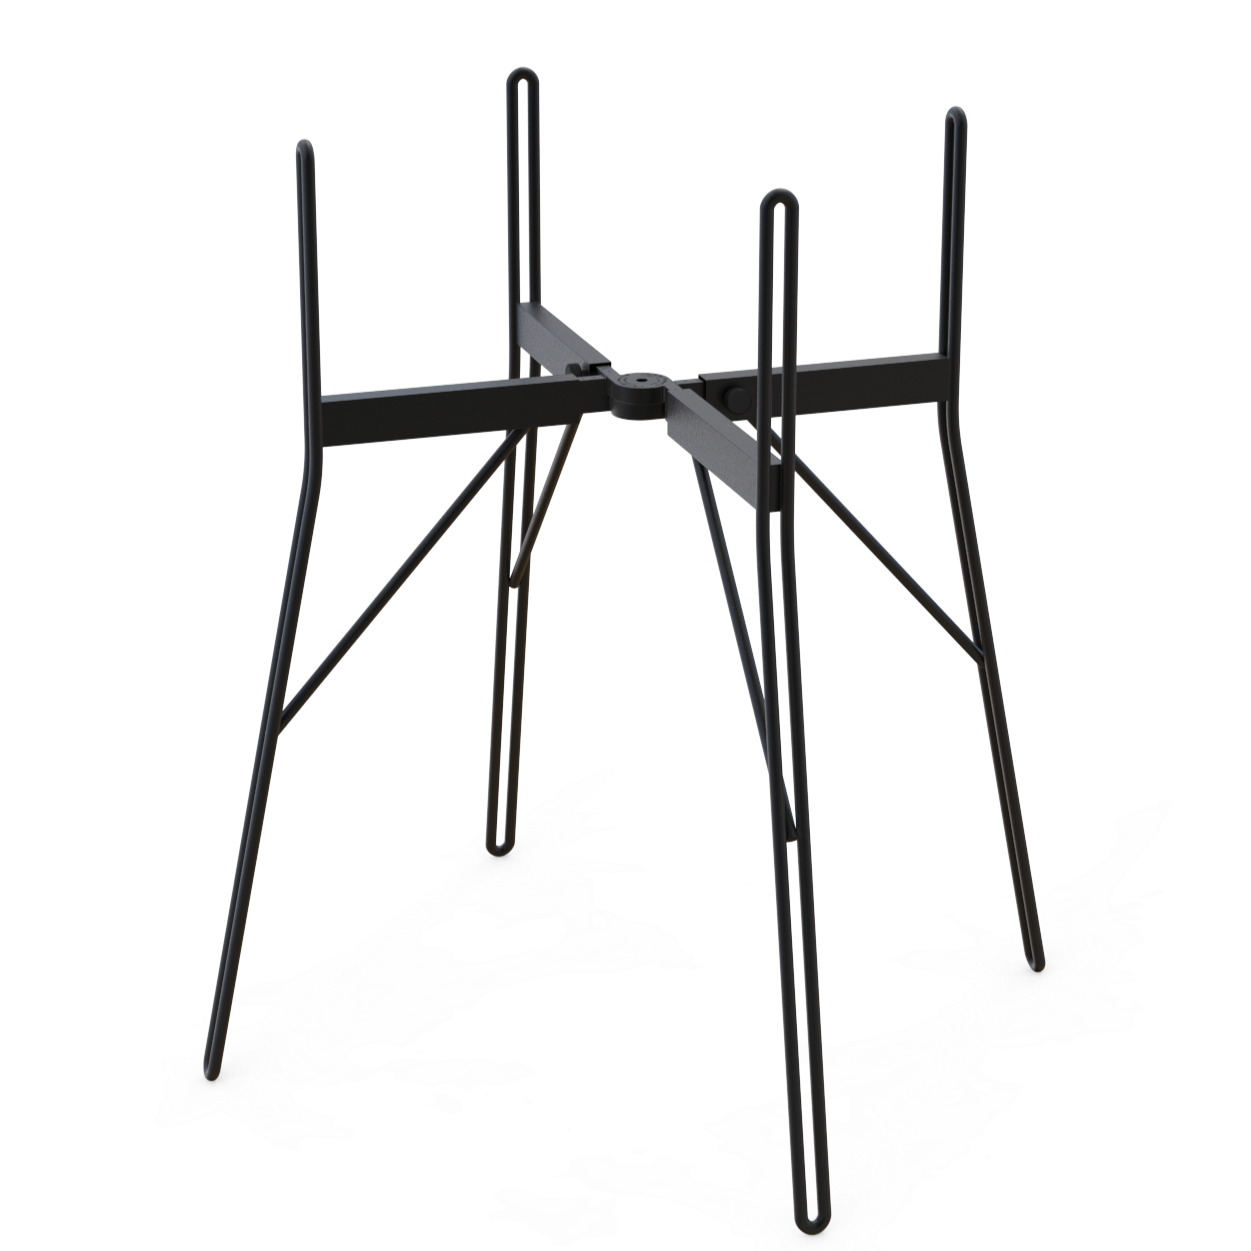 Soho adjustable plant stand in black